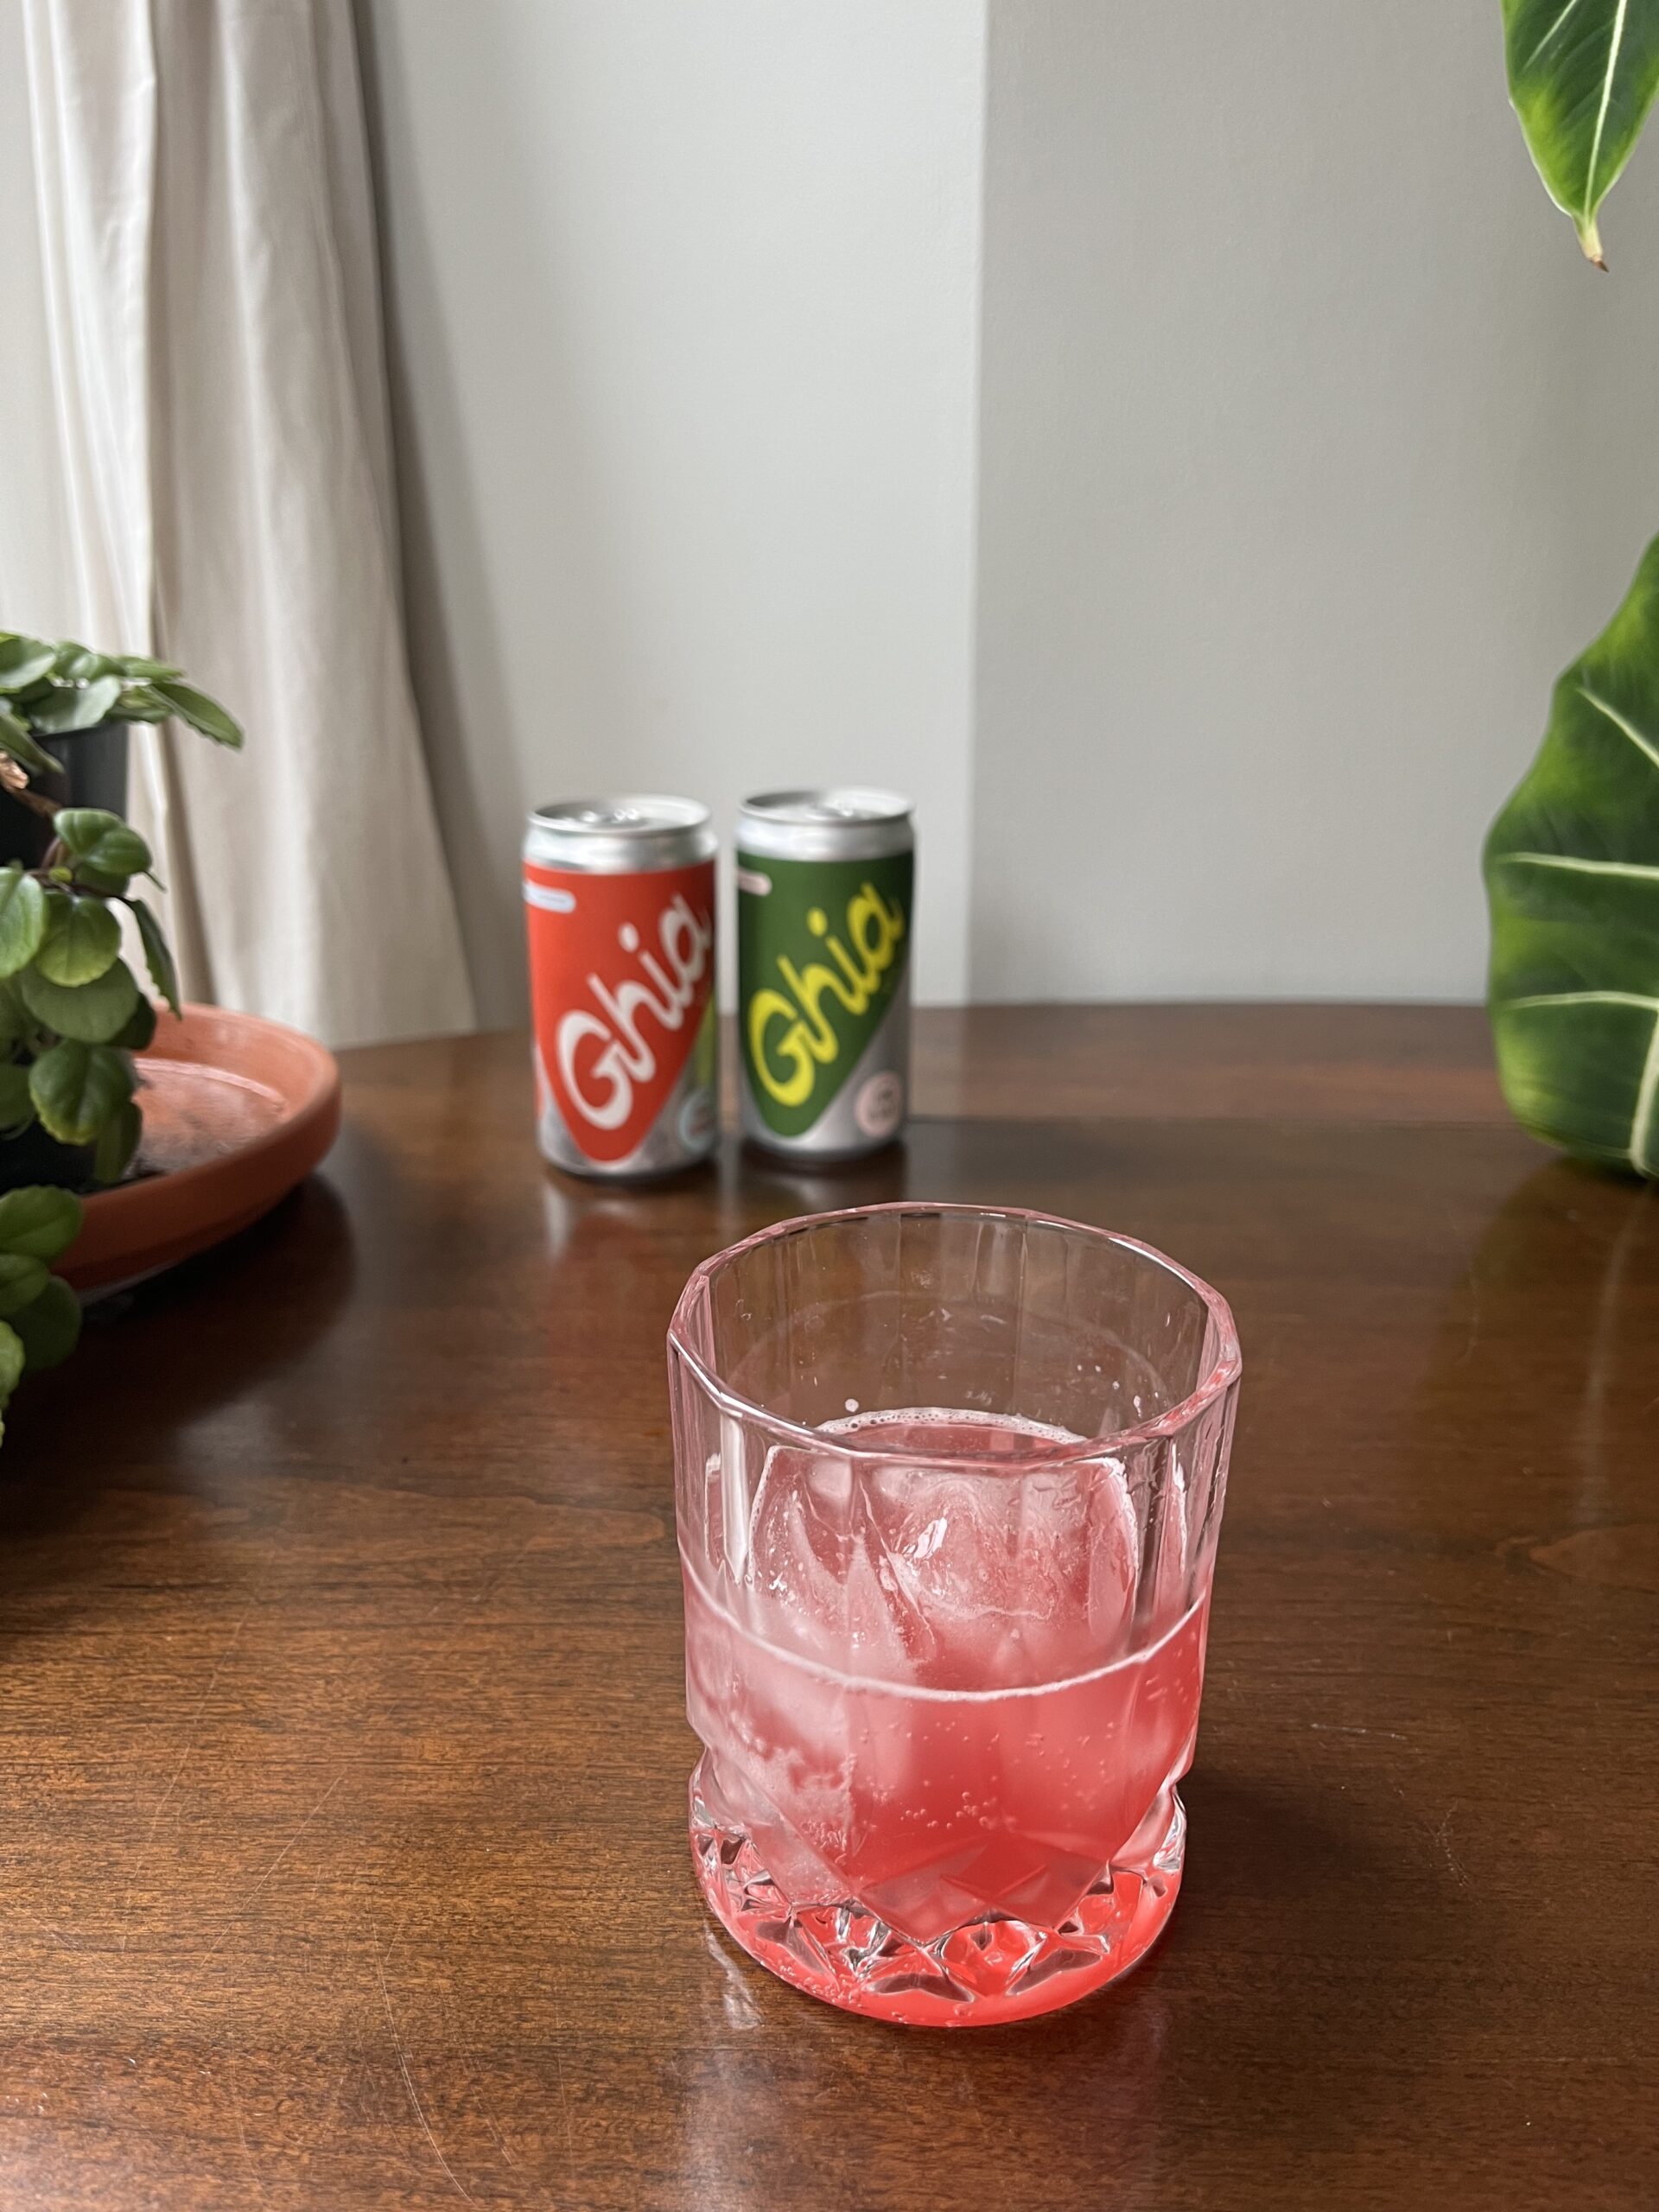 A glass of pink beverage with ice sits on a wooden table, with two cans of Ghia behind it. A potted plant is partially visible on the left.